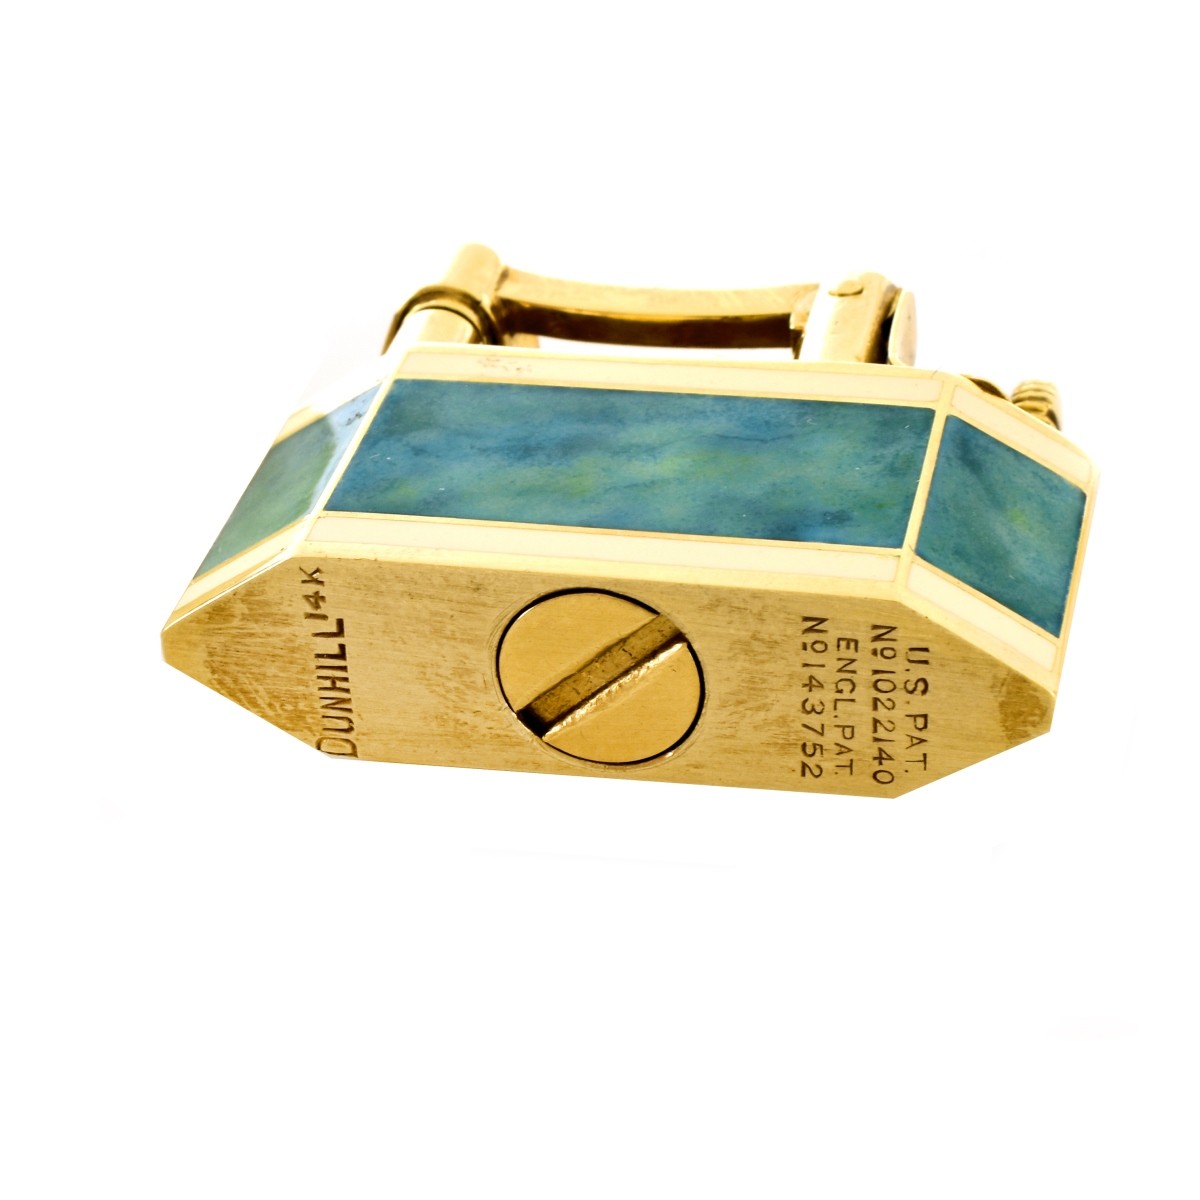 14K Gold and Enamel Compact and Lighter